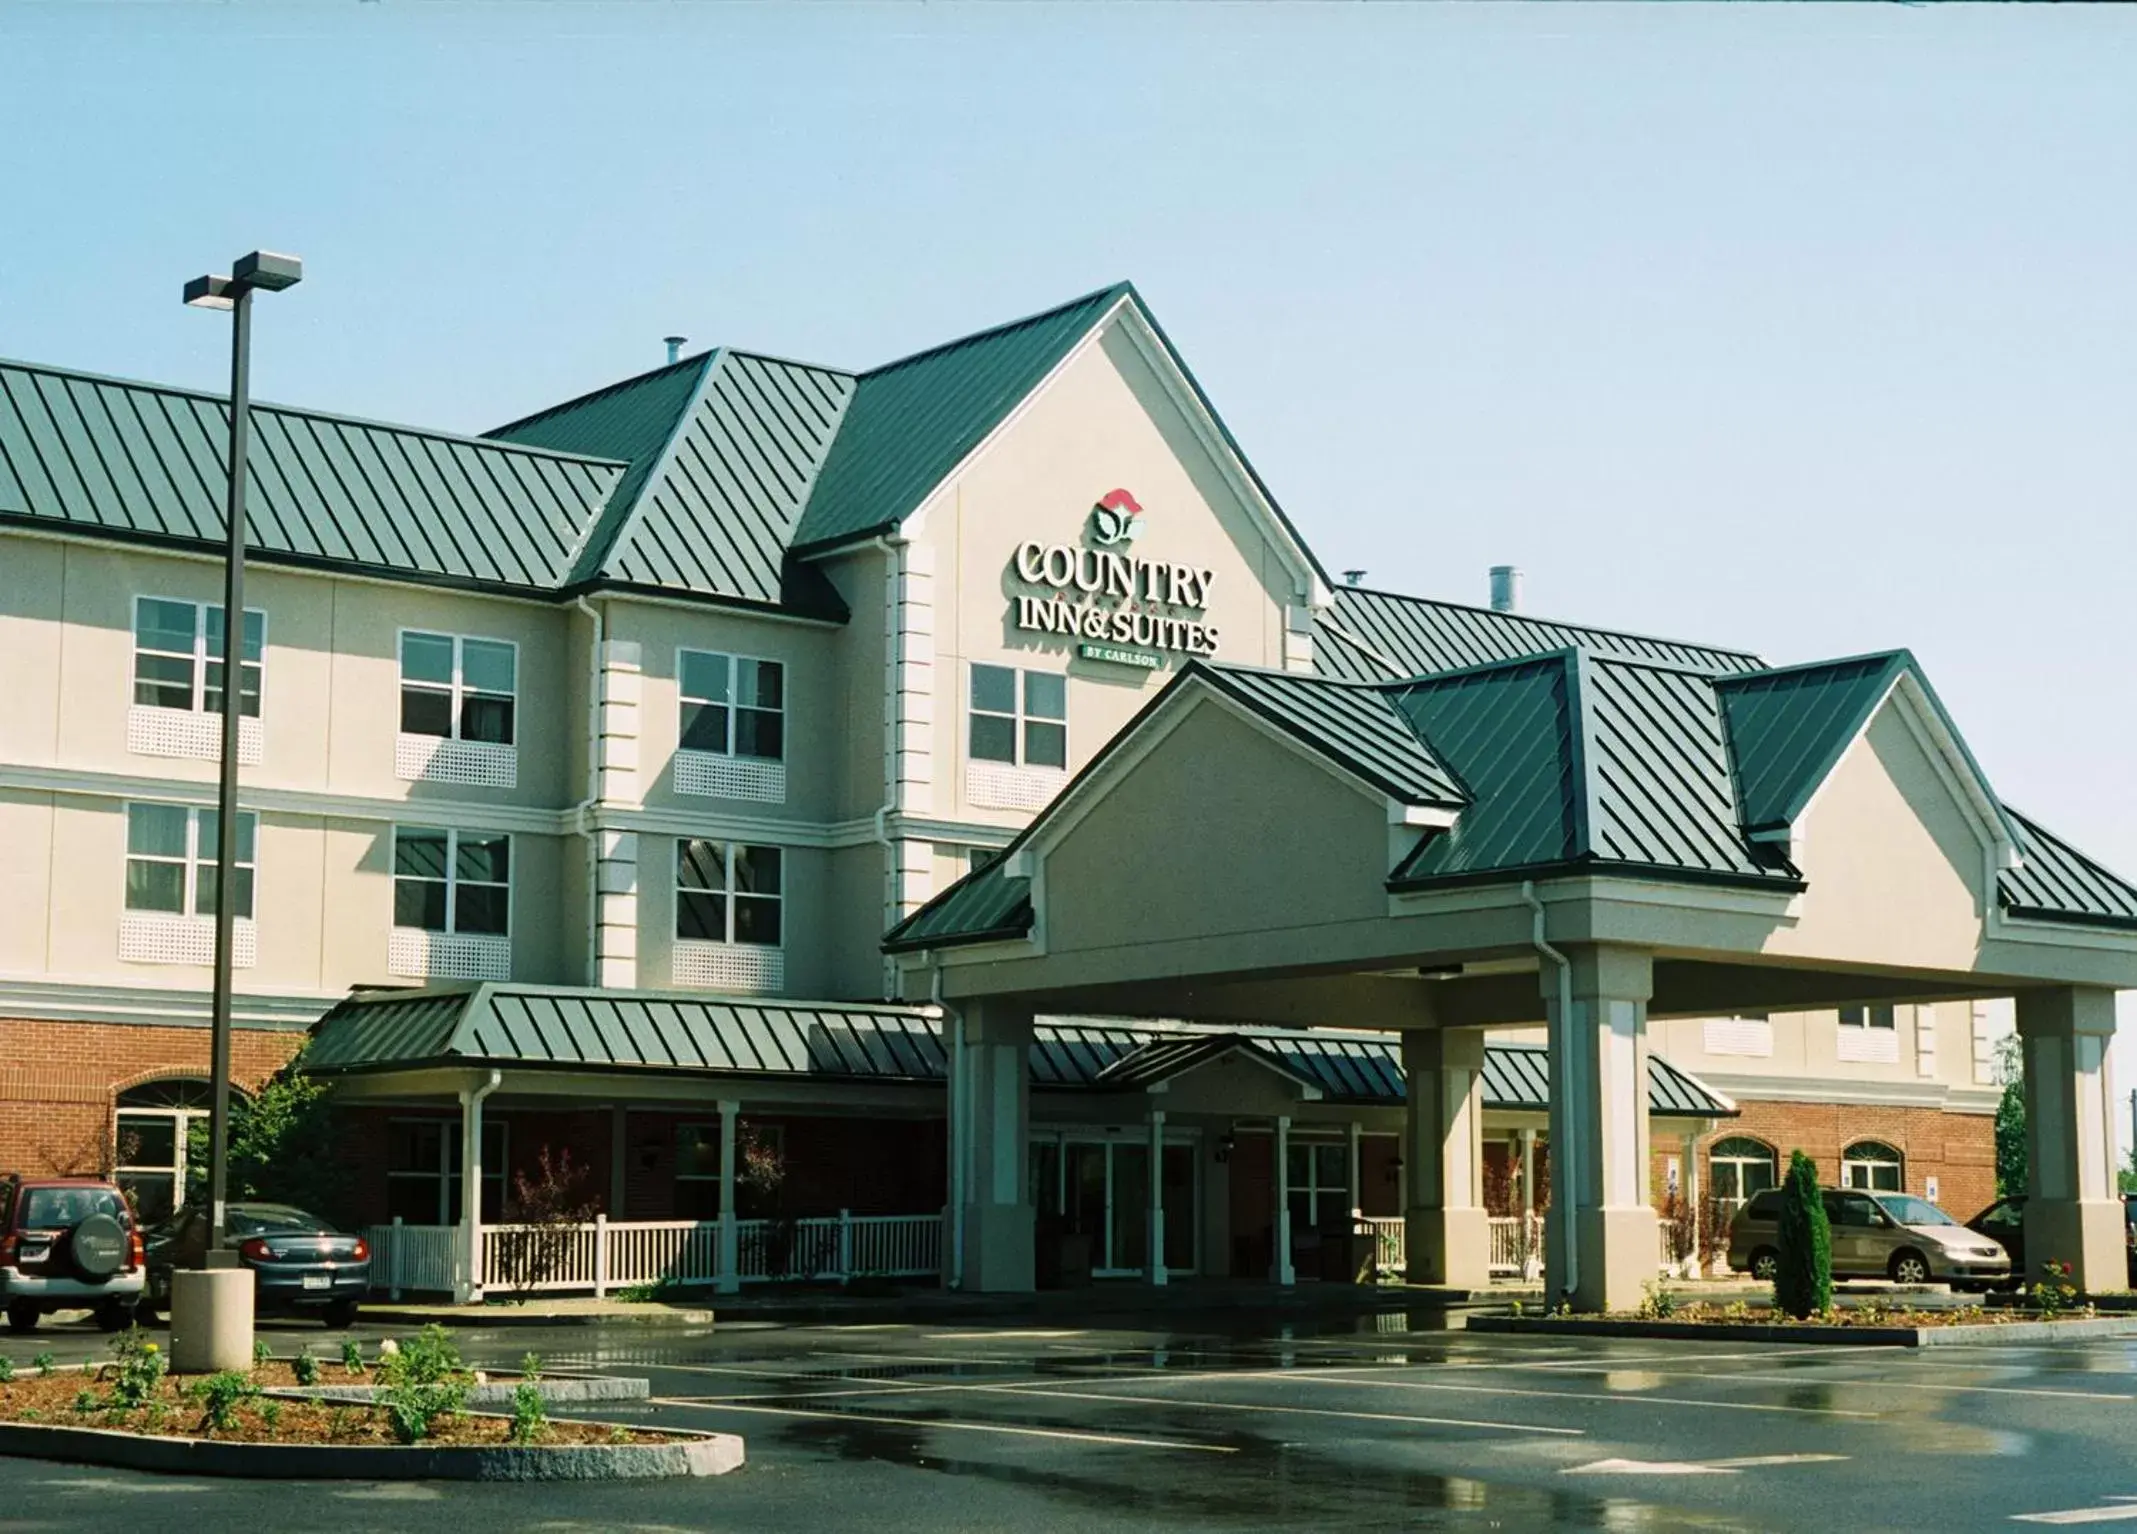 Facade/entrance, Property Building in Country Inn & Suites by Radisson, Brockton (Boston), MA